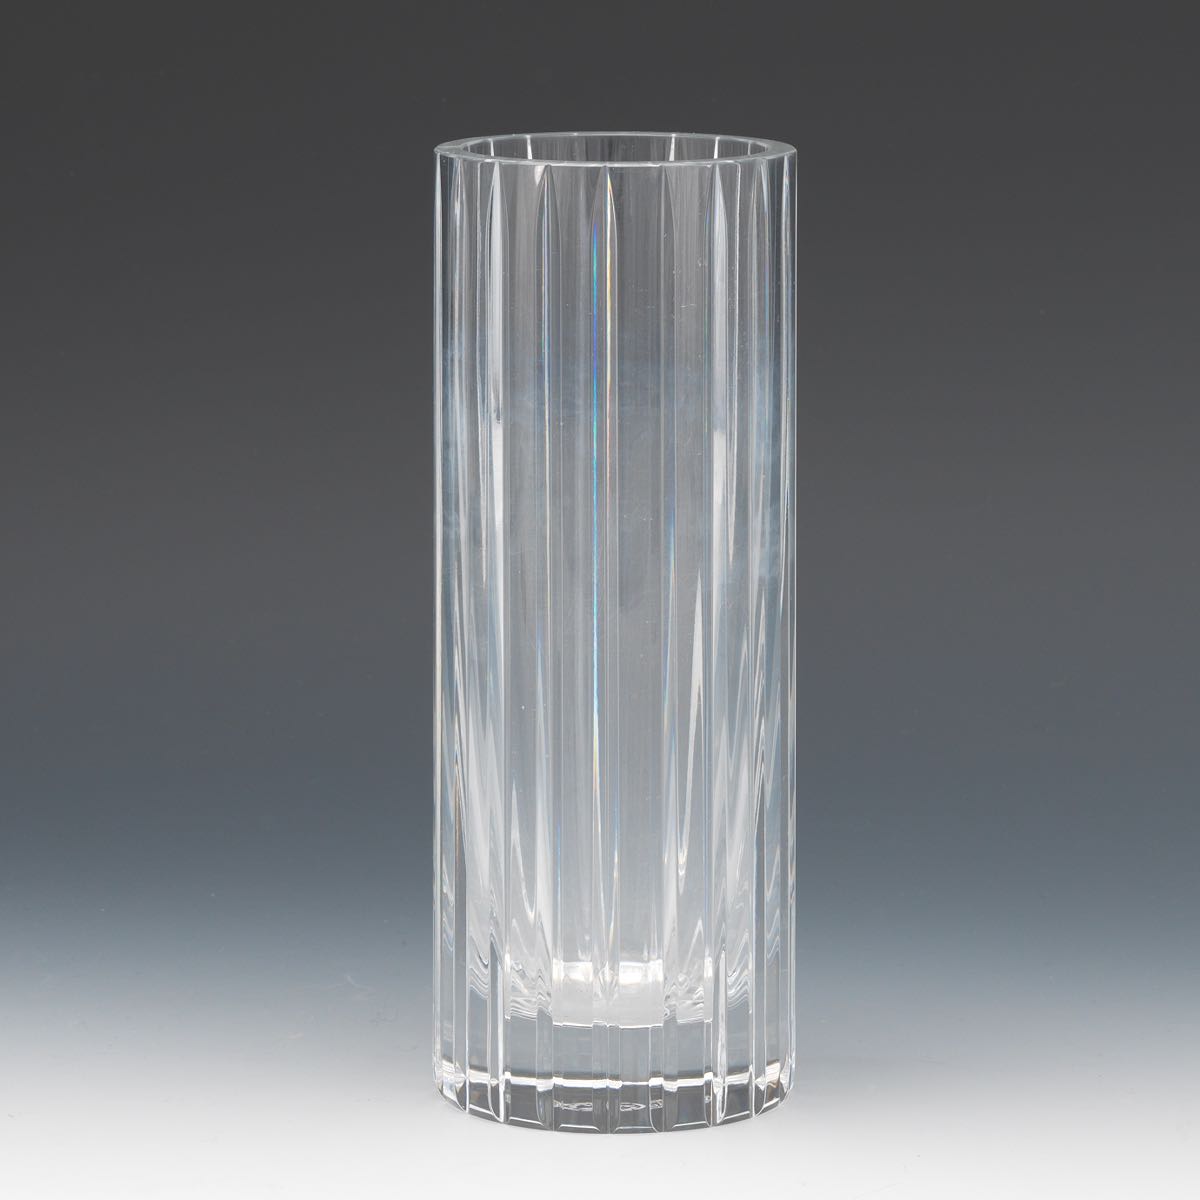 Baccarat Vase, "Harmonie" 8" x 3" dia.Cylindrical form Baccarat glass vase with furrowed sides, acid